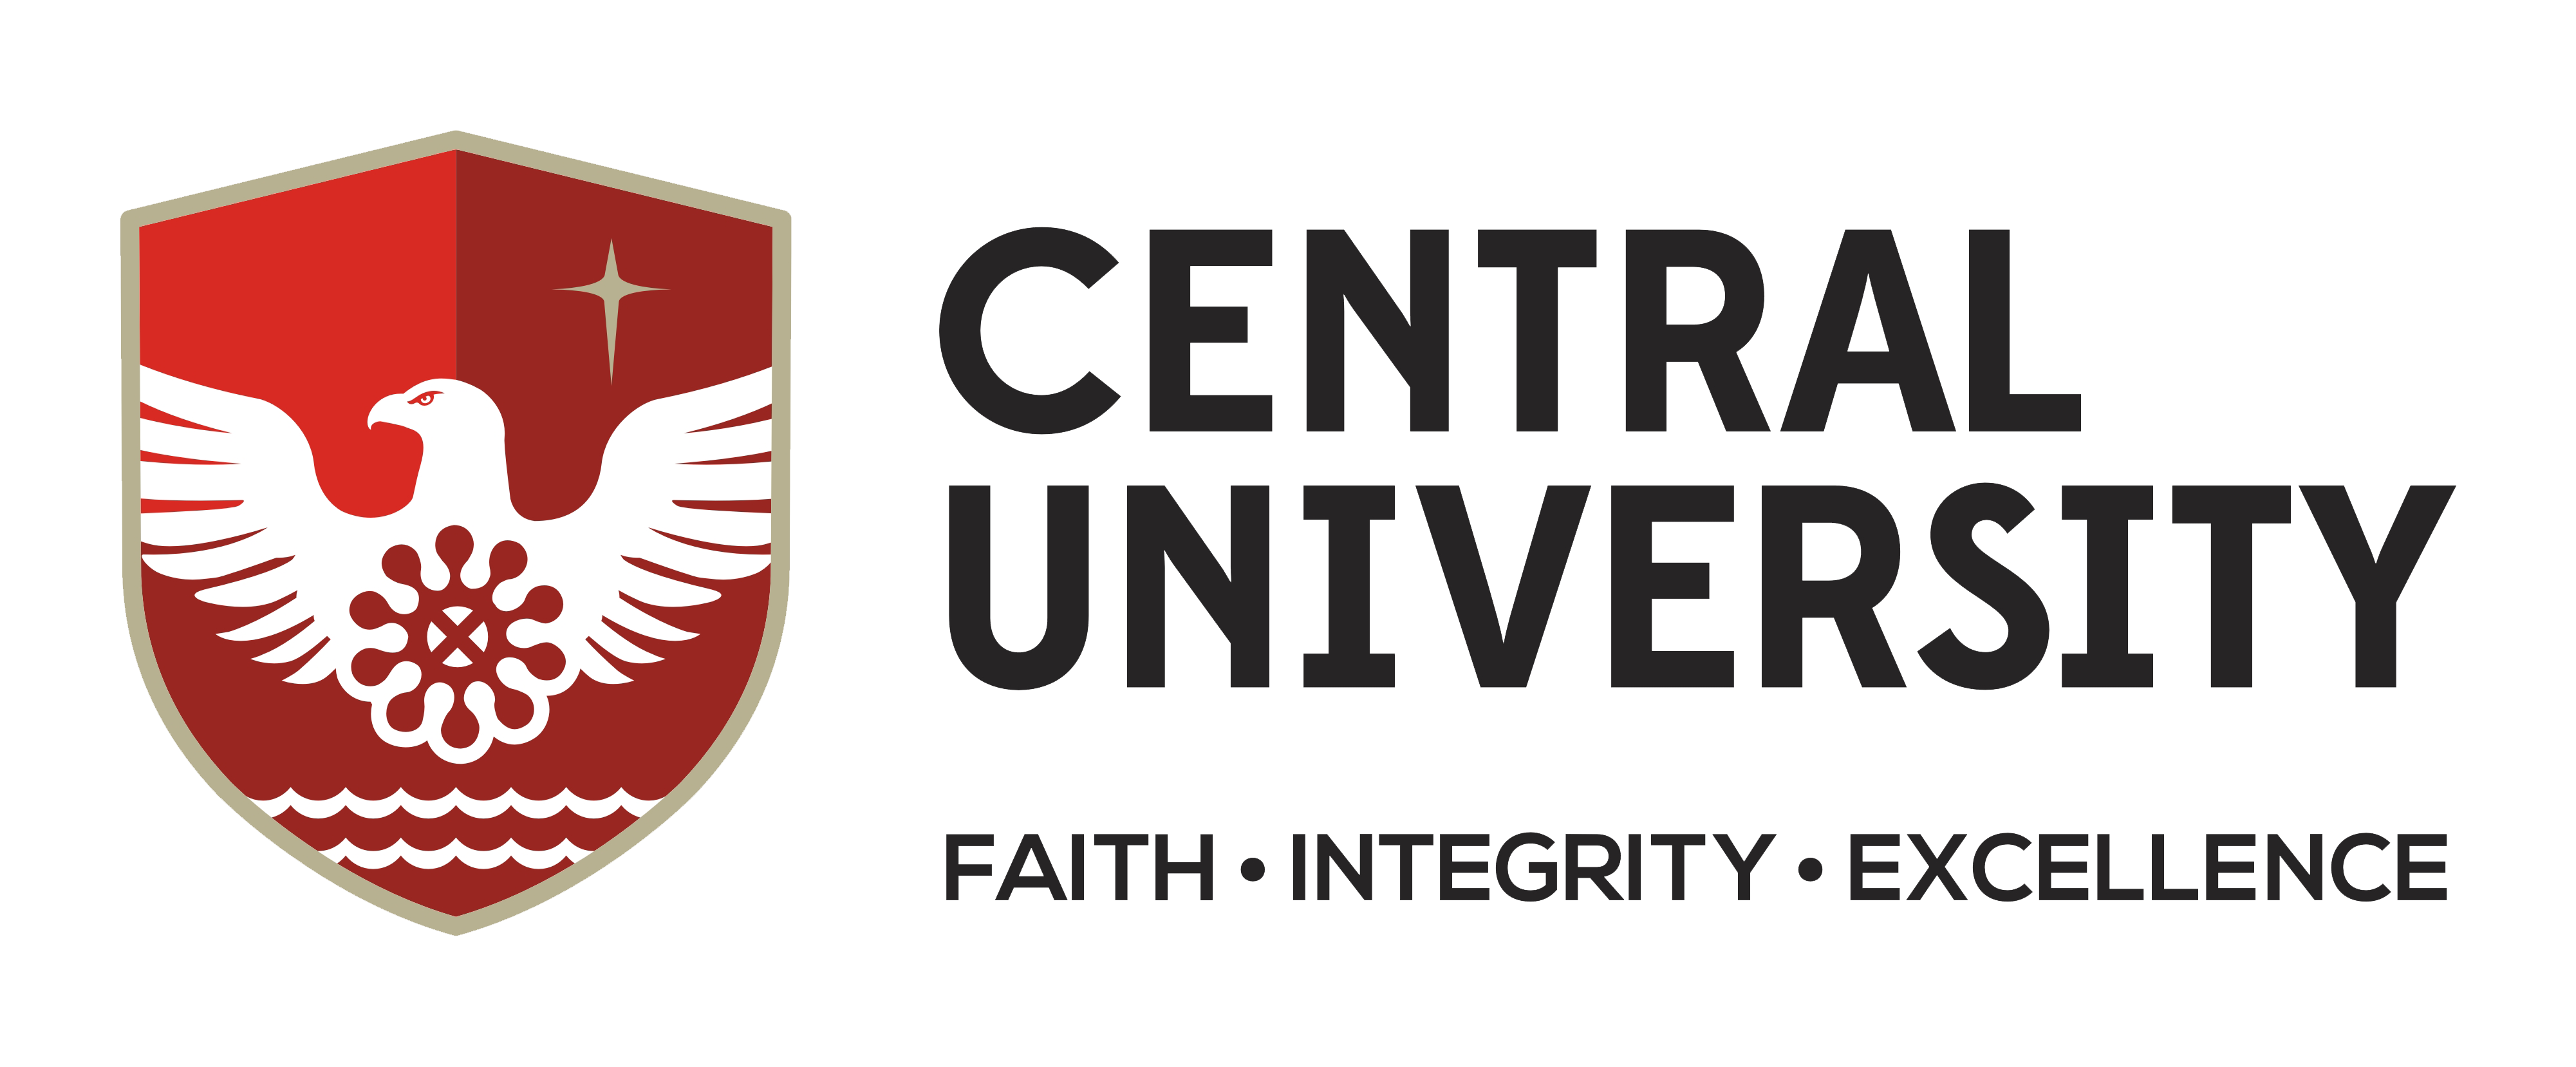 The Cost of Application at Central University College